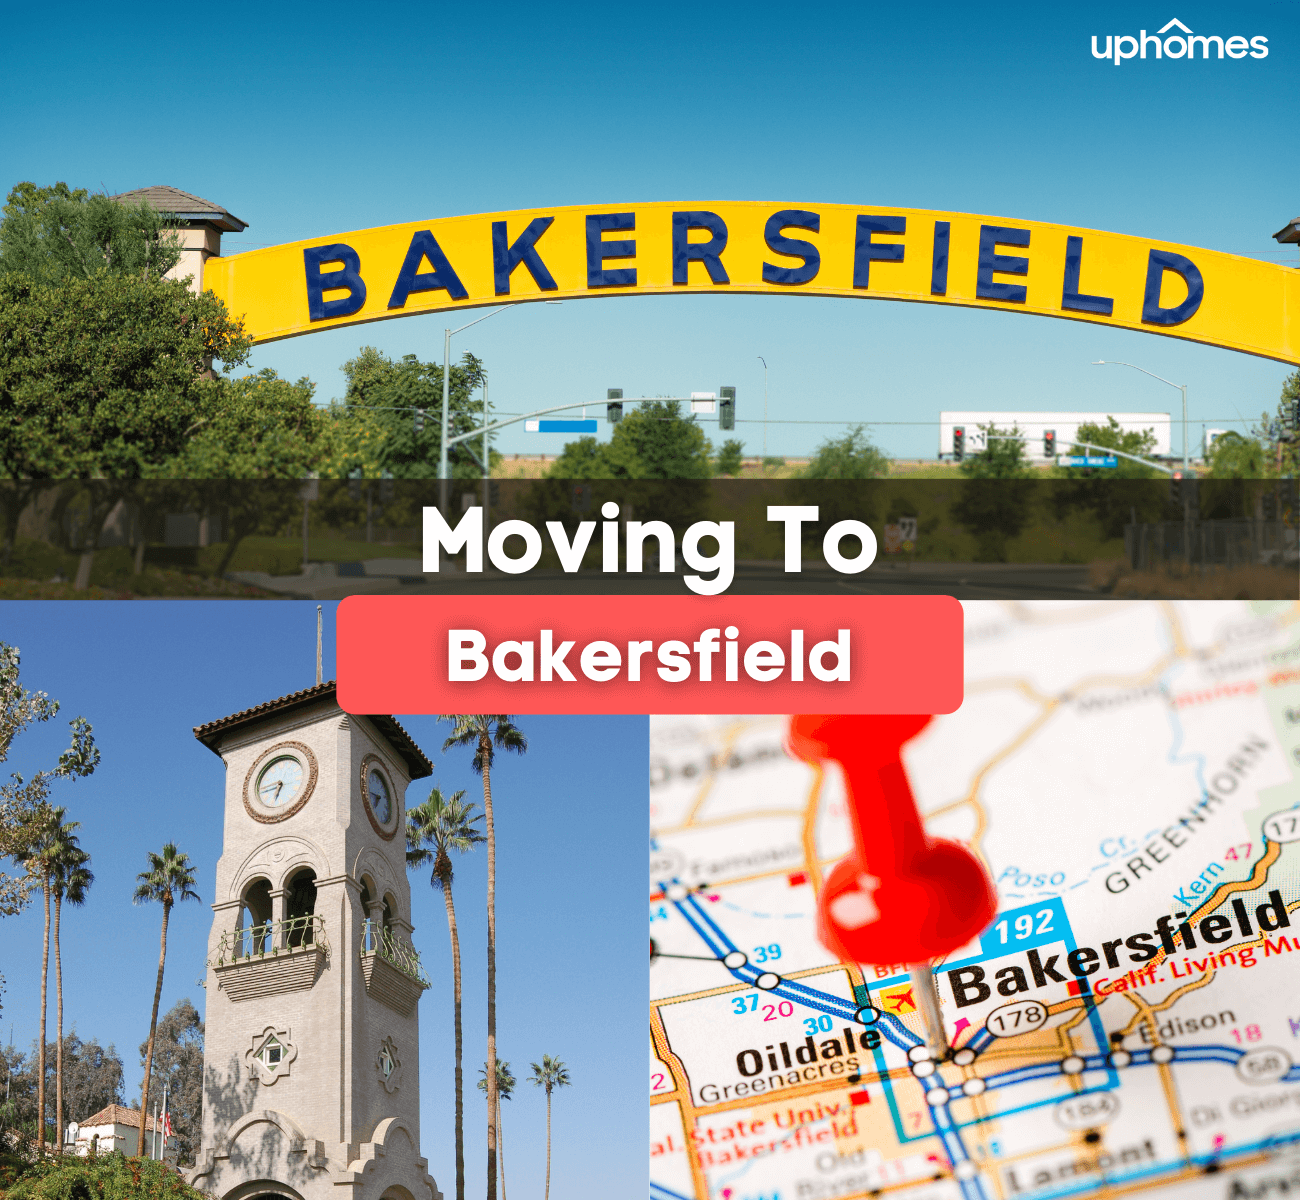 Moving to Bakersfield, CA - What is it like living in Bakersfield?